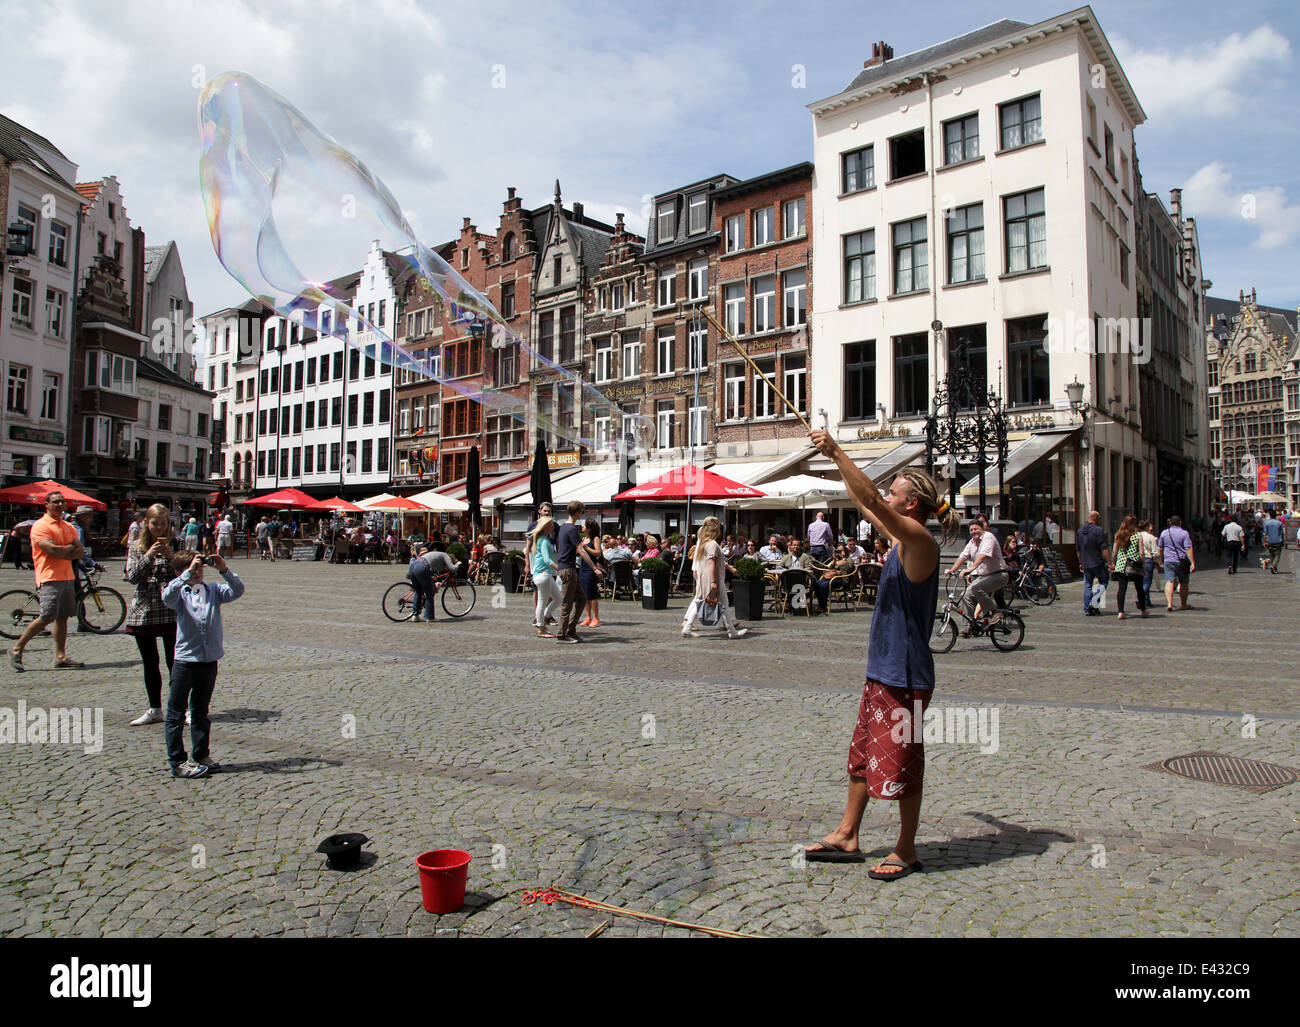 Bubble blowing on the streets of Antwerp Belgium.Bubbleman Stock Photo